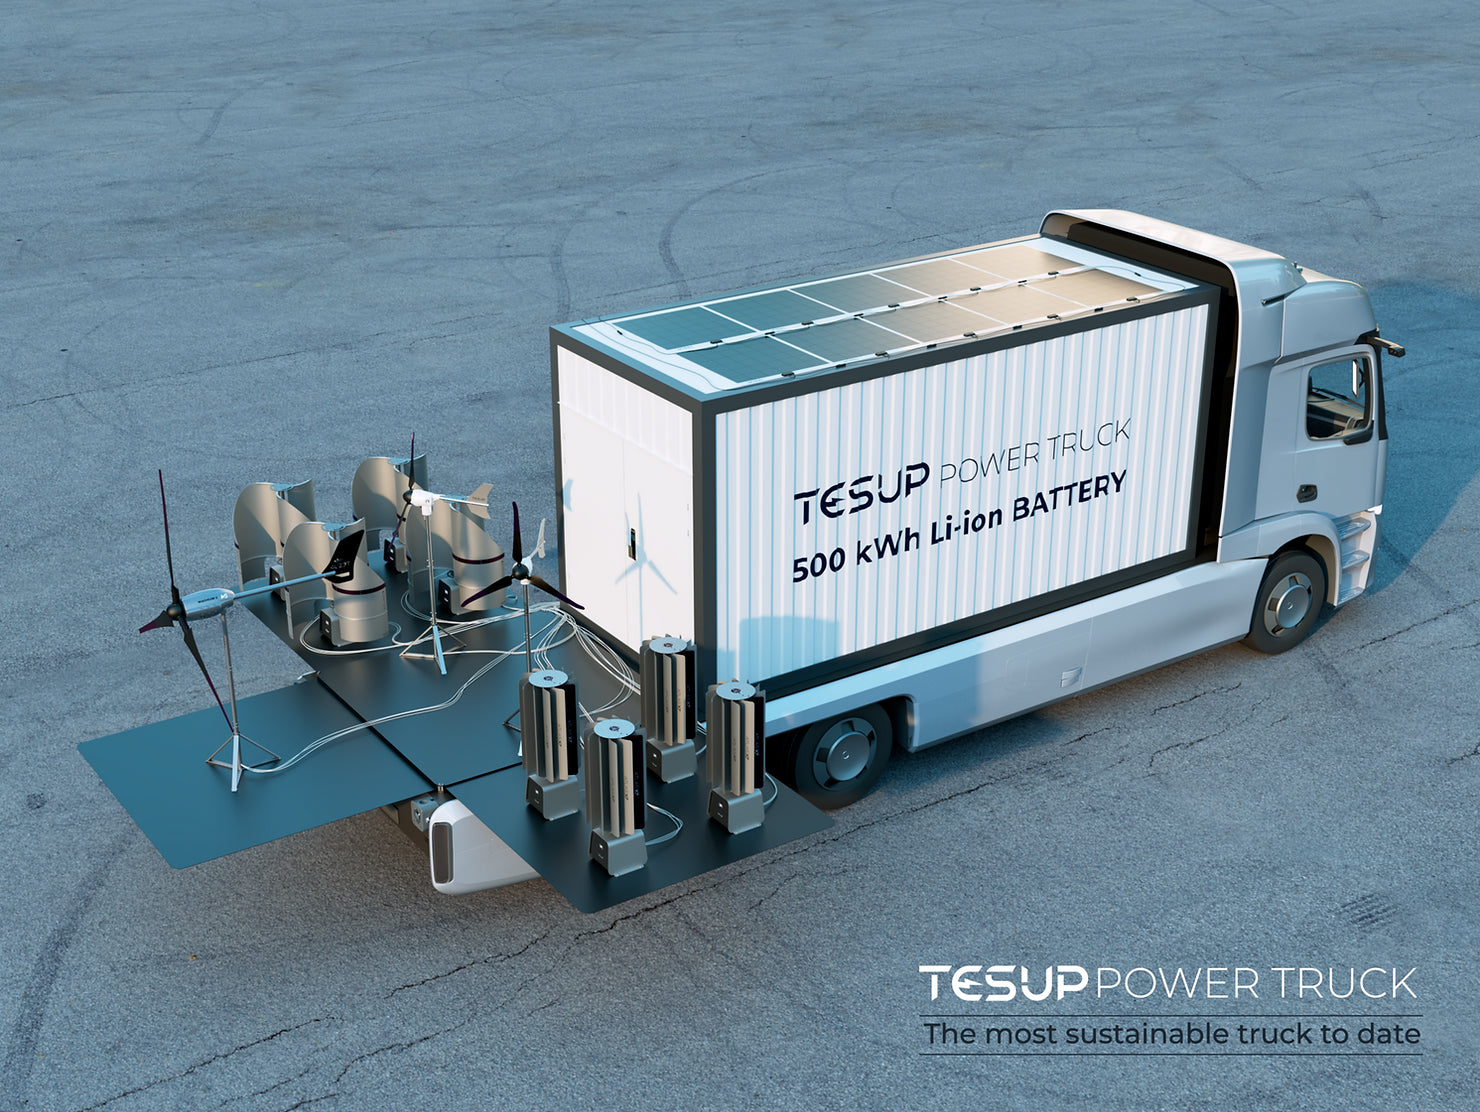 Introducing the most sustainable truck to date: TESUP Power Truck!